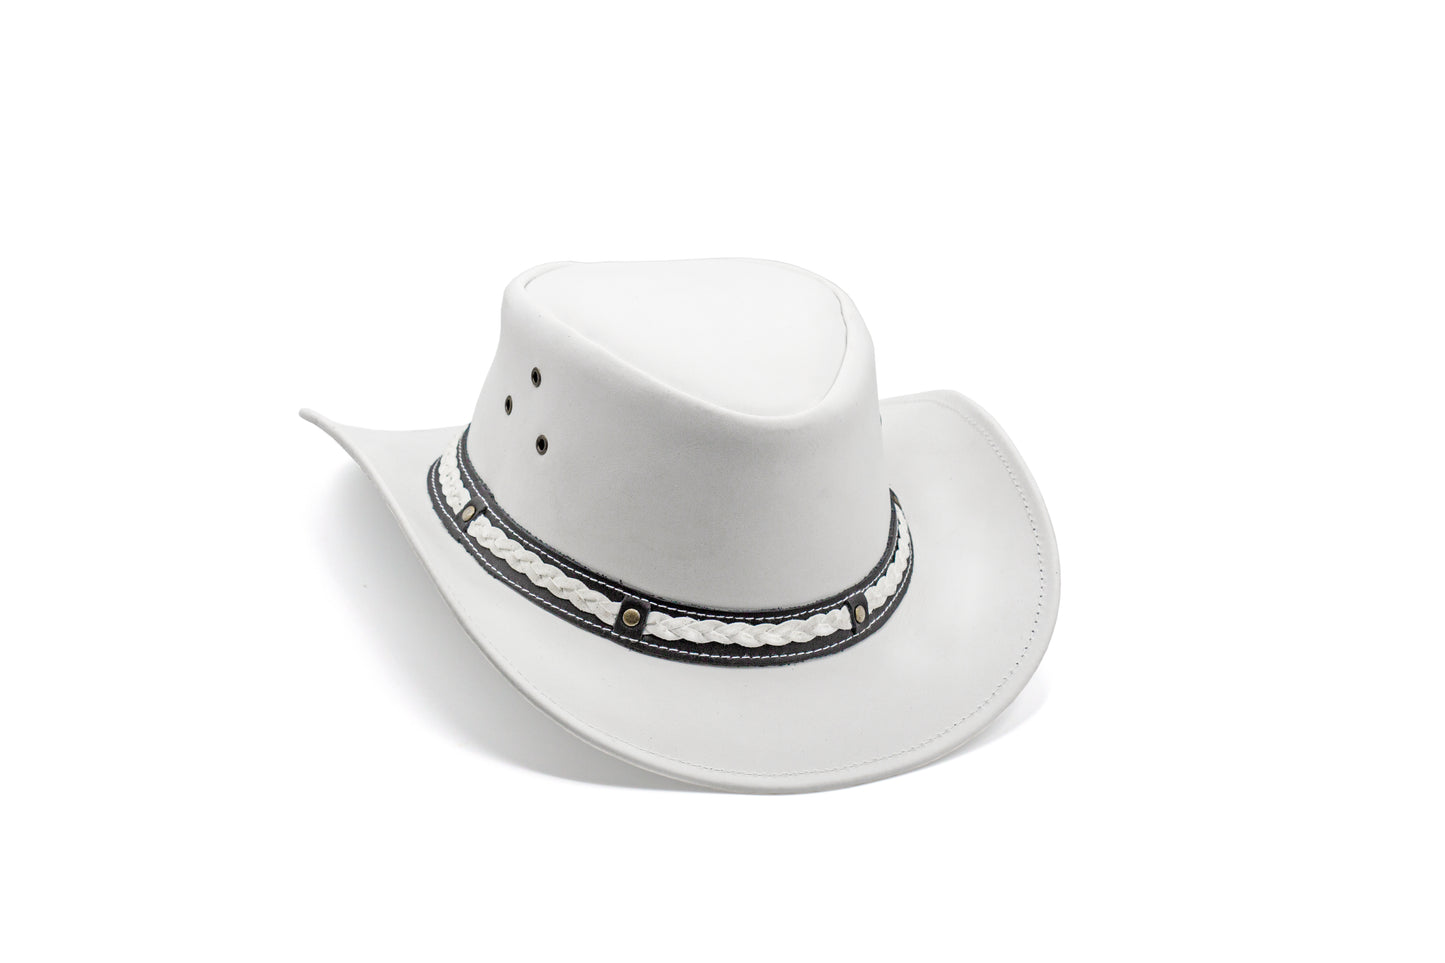 white leather cowboy hat Australian style shapeable as outback best gift for teenage boys girls Christmas grandma grandpa